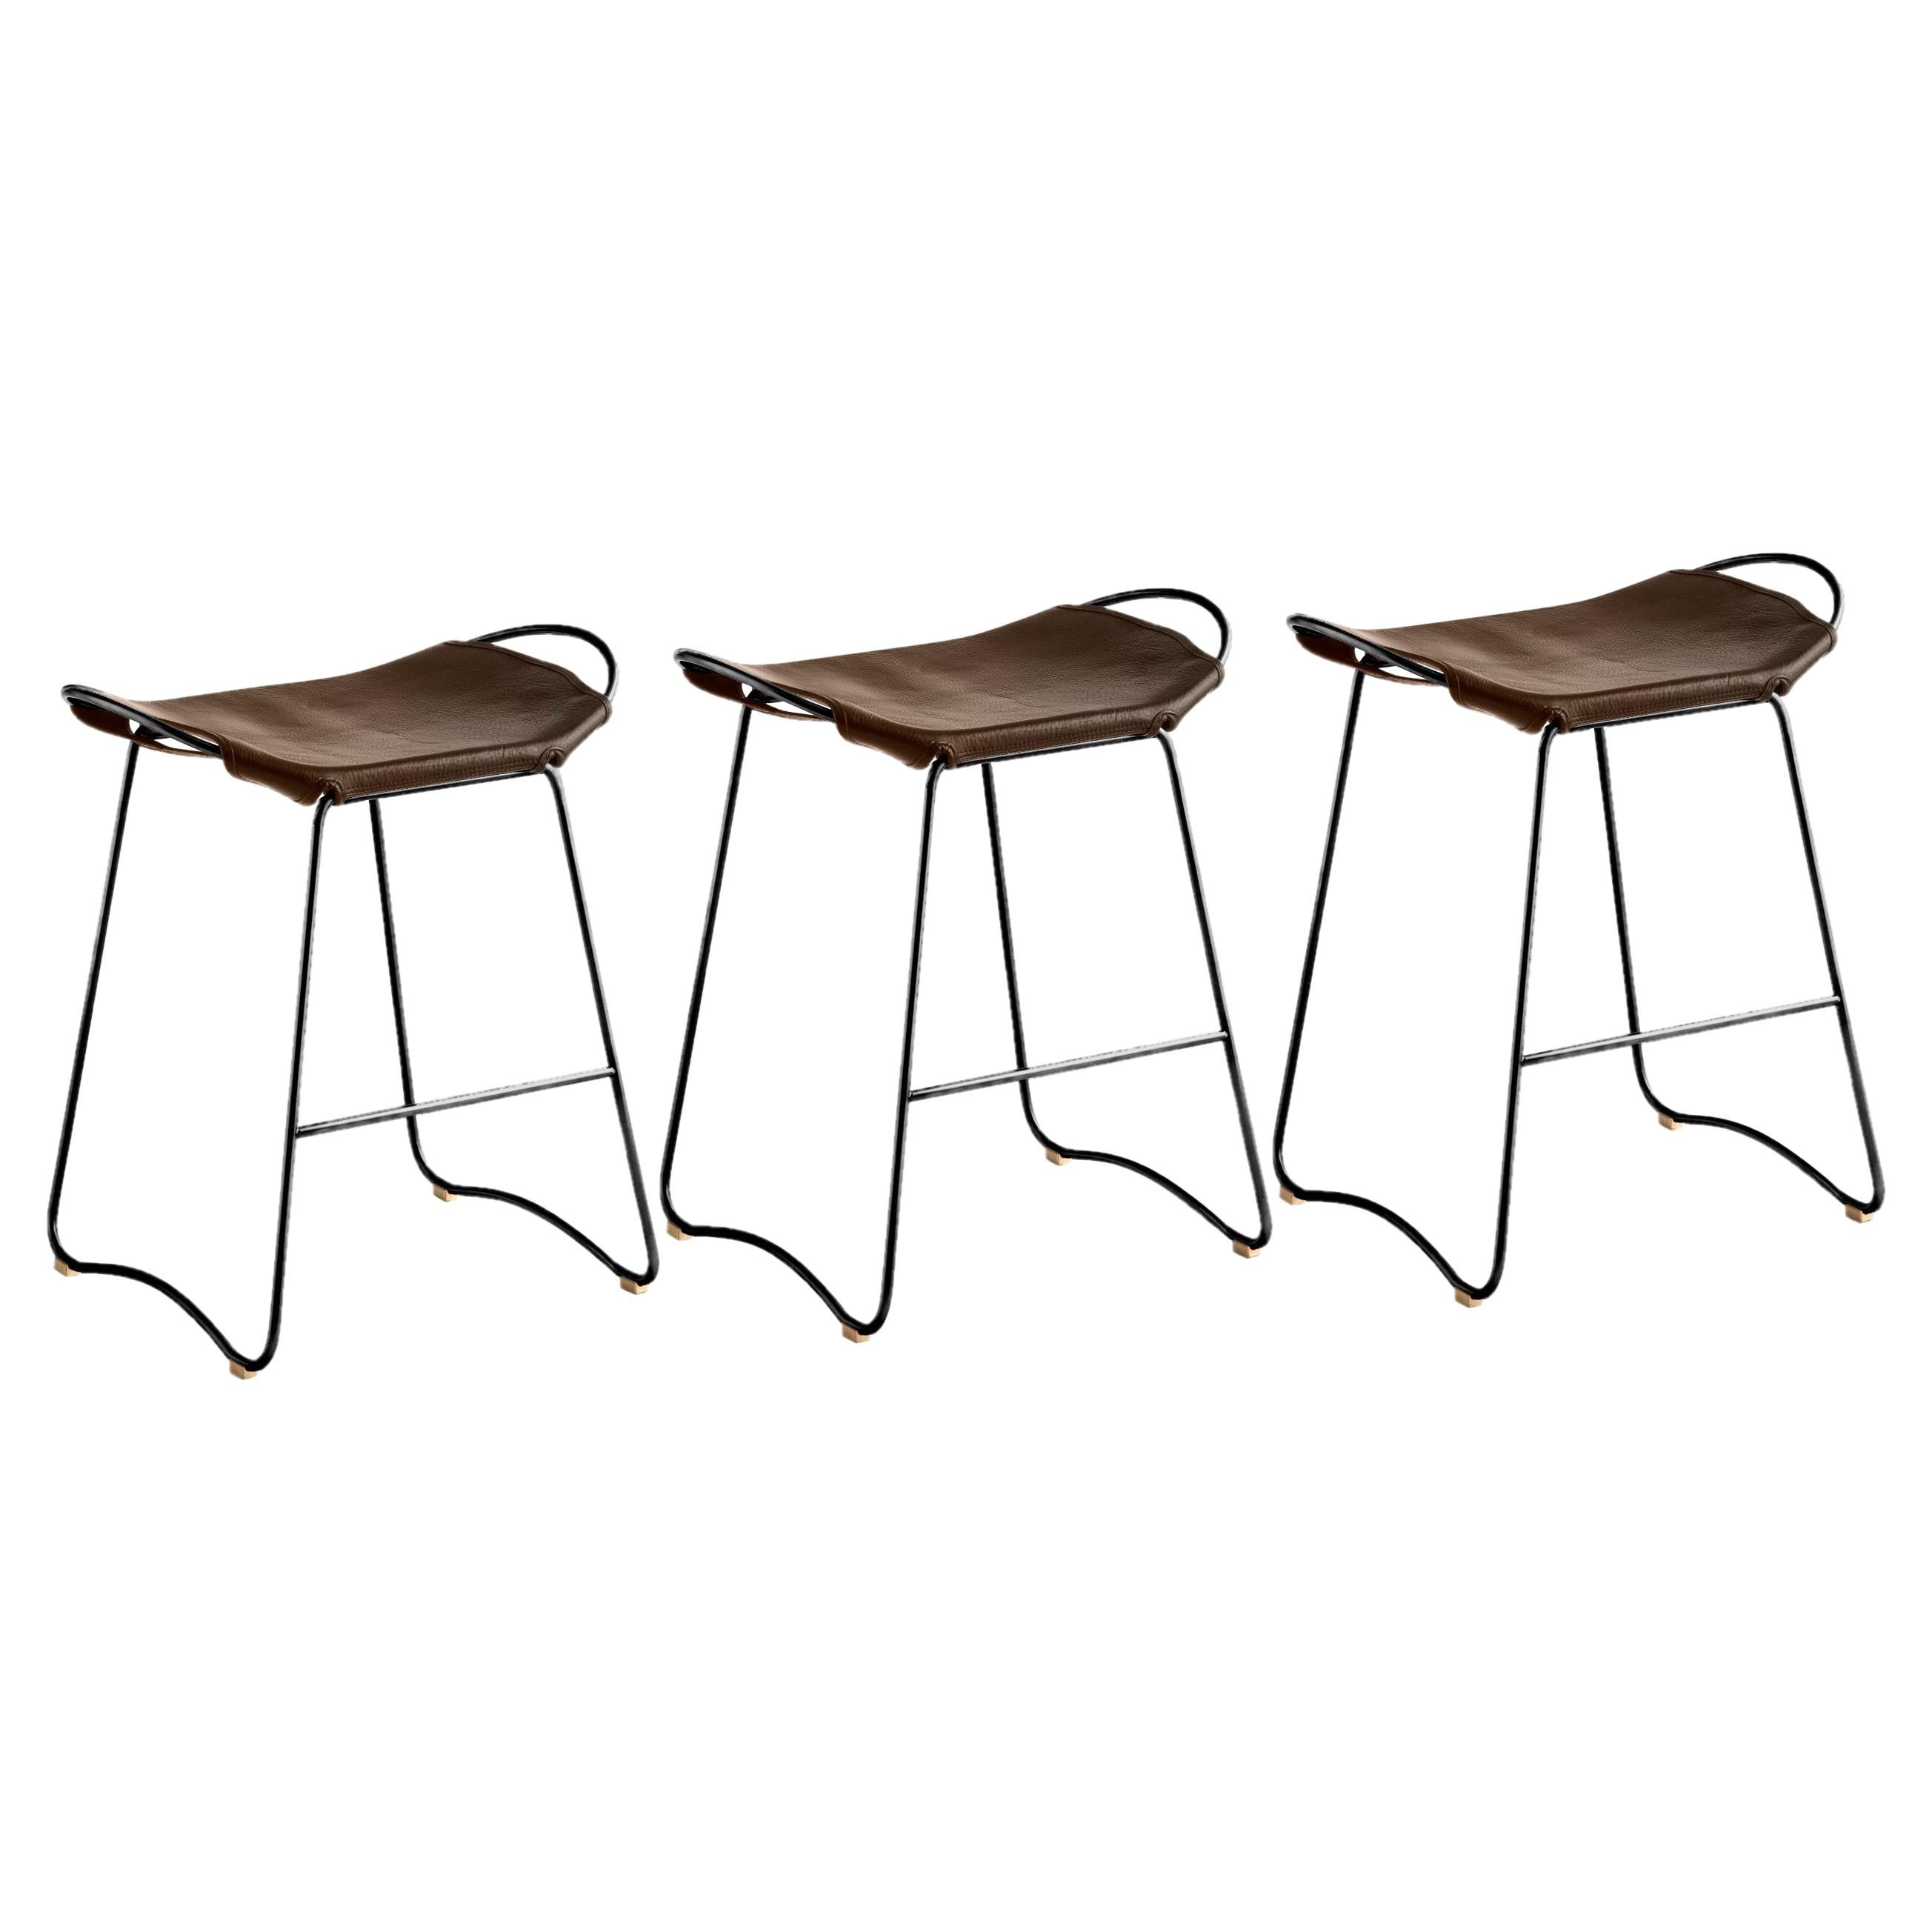 Set of 3 Contemporary Kitchen Counter Bar Stool Black Steel, Dark Brown Leather